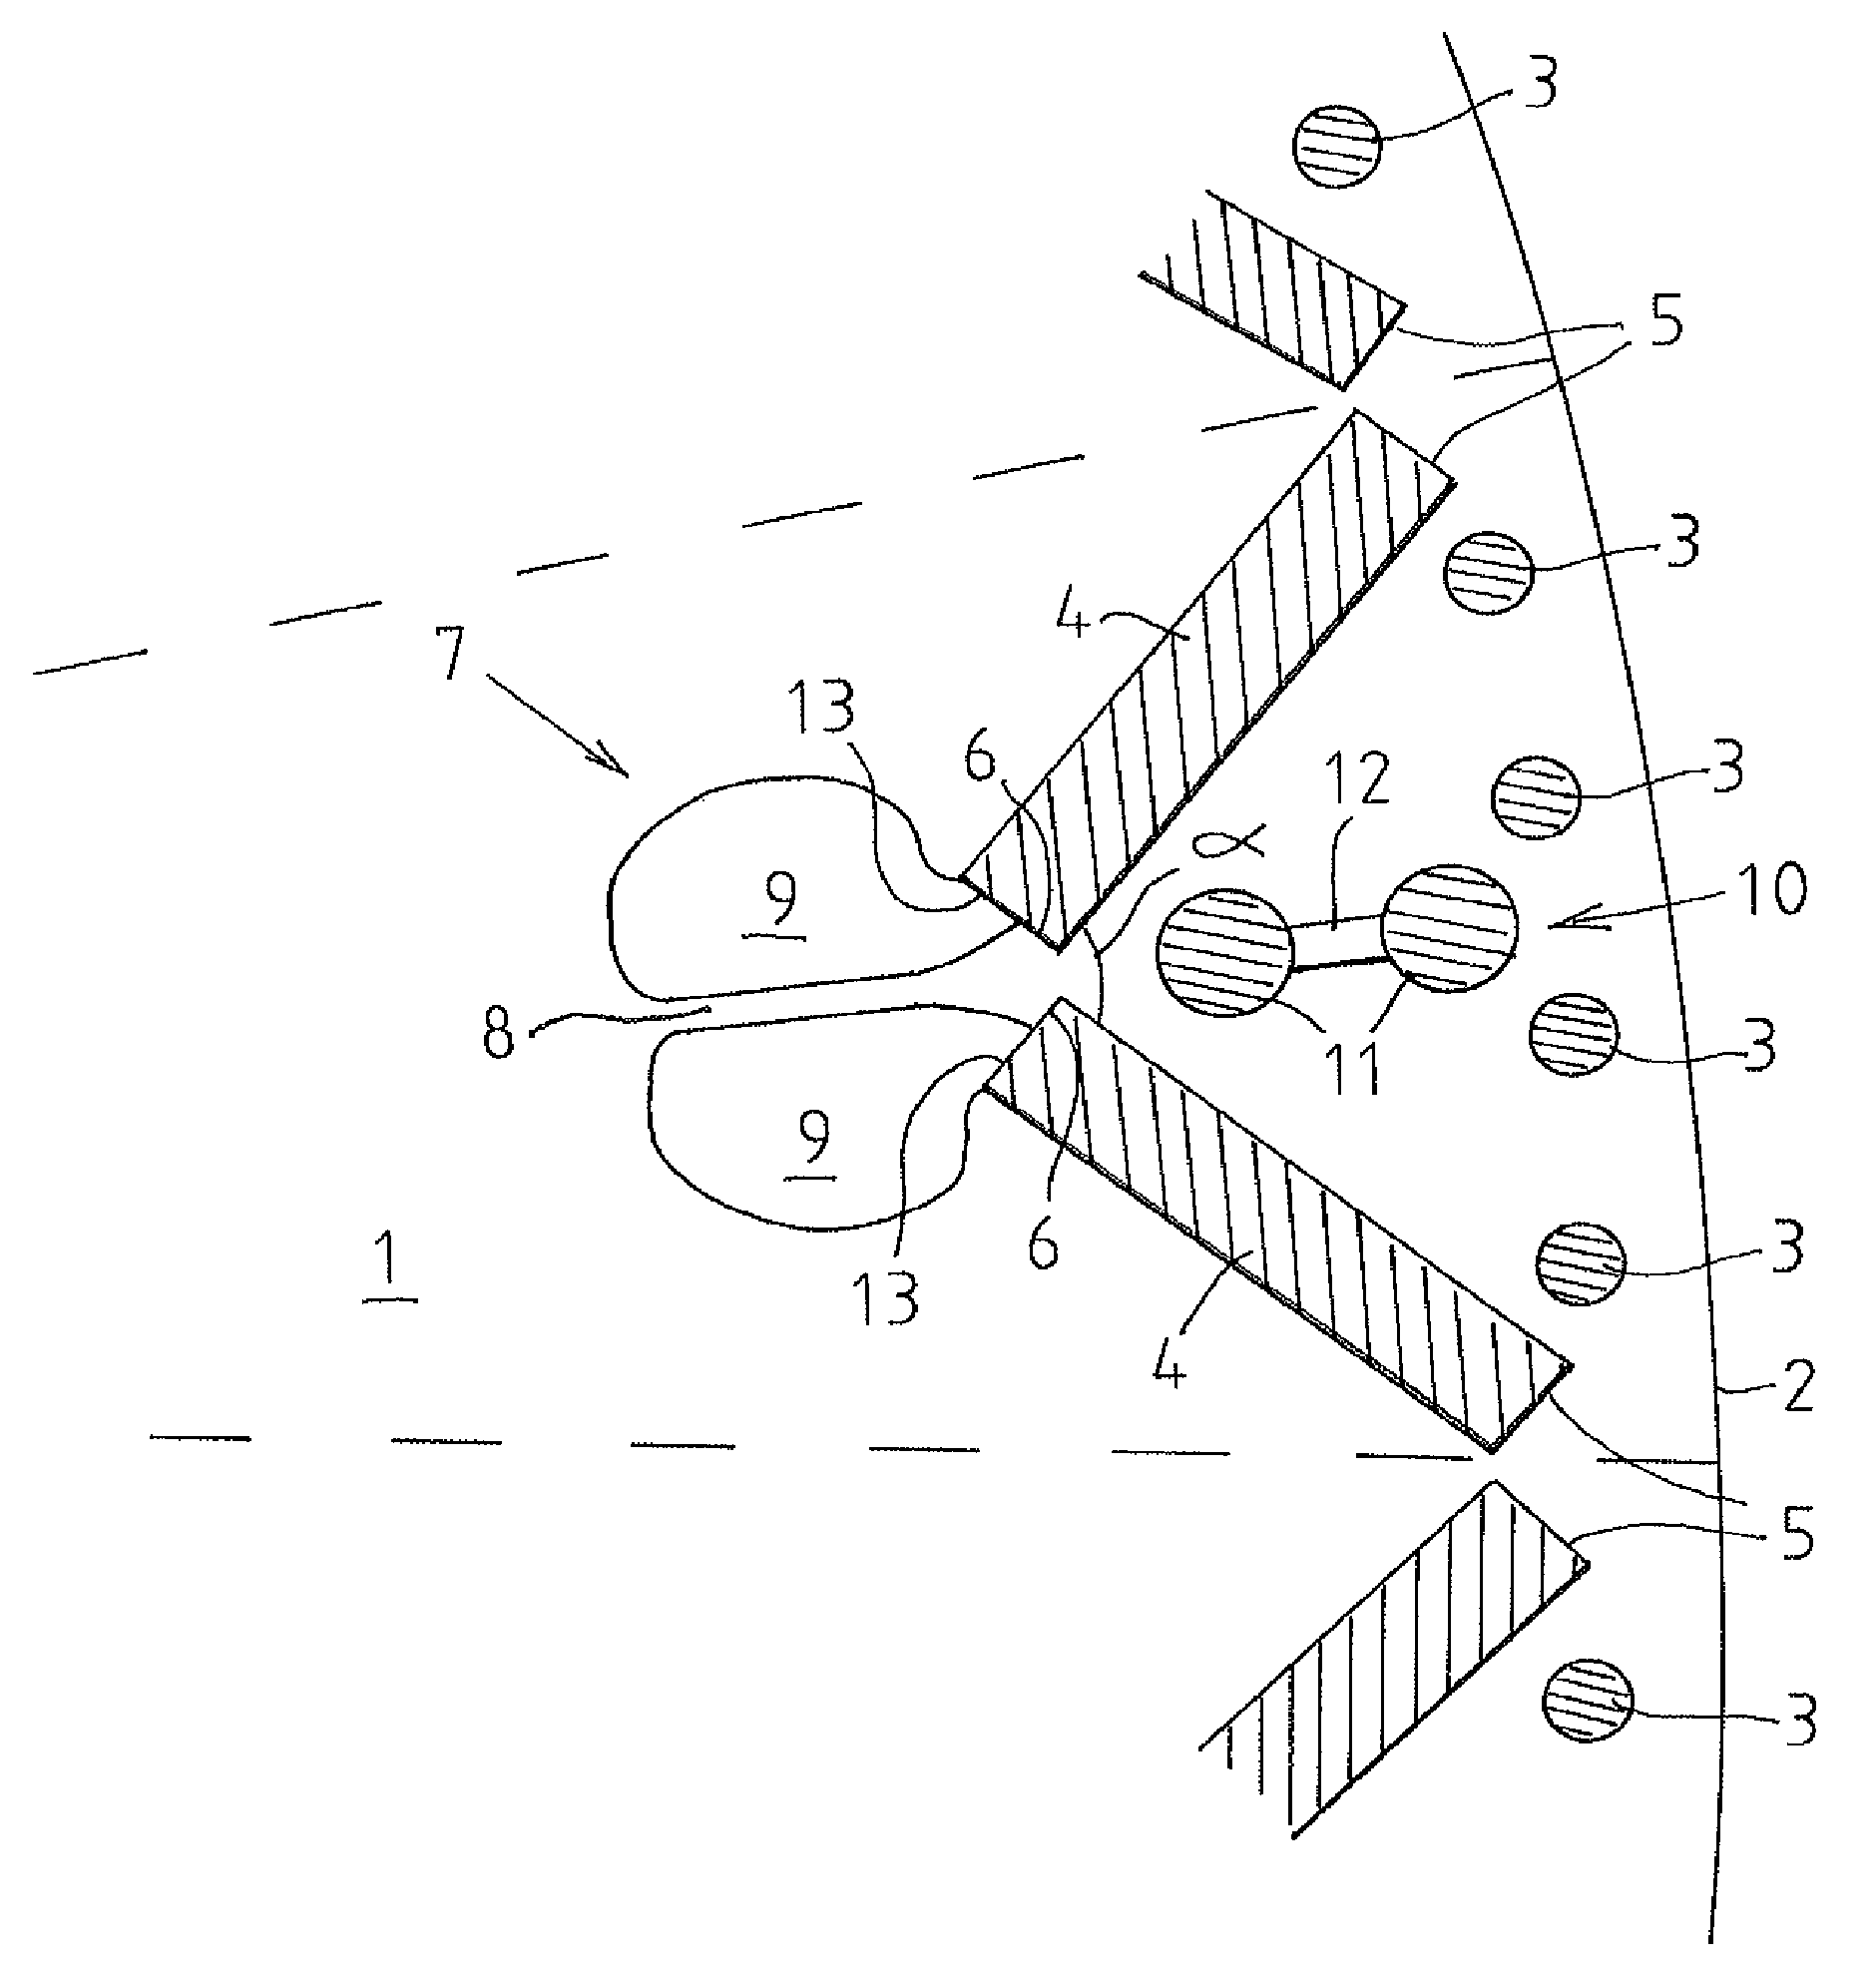 Laminated rotor structure for a permanent magnet synchronous machine